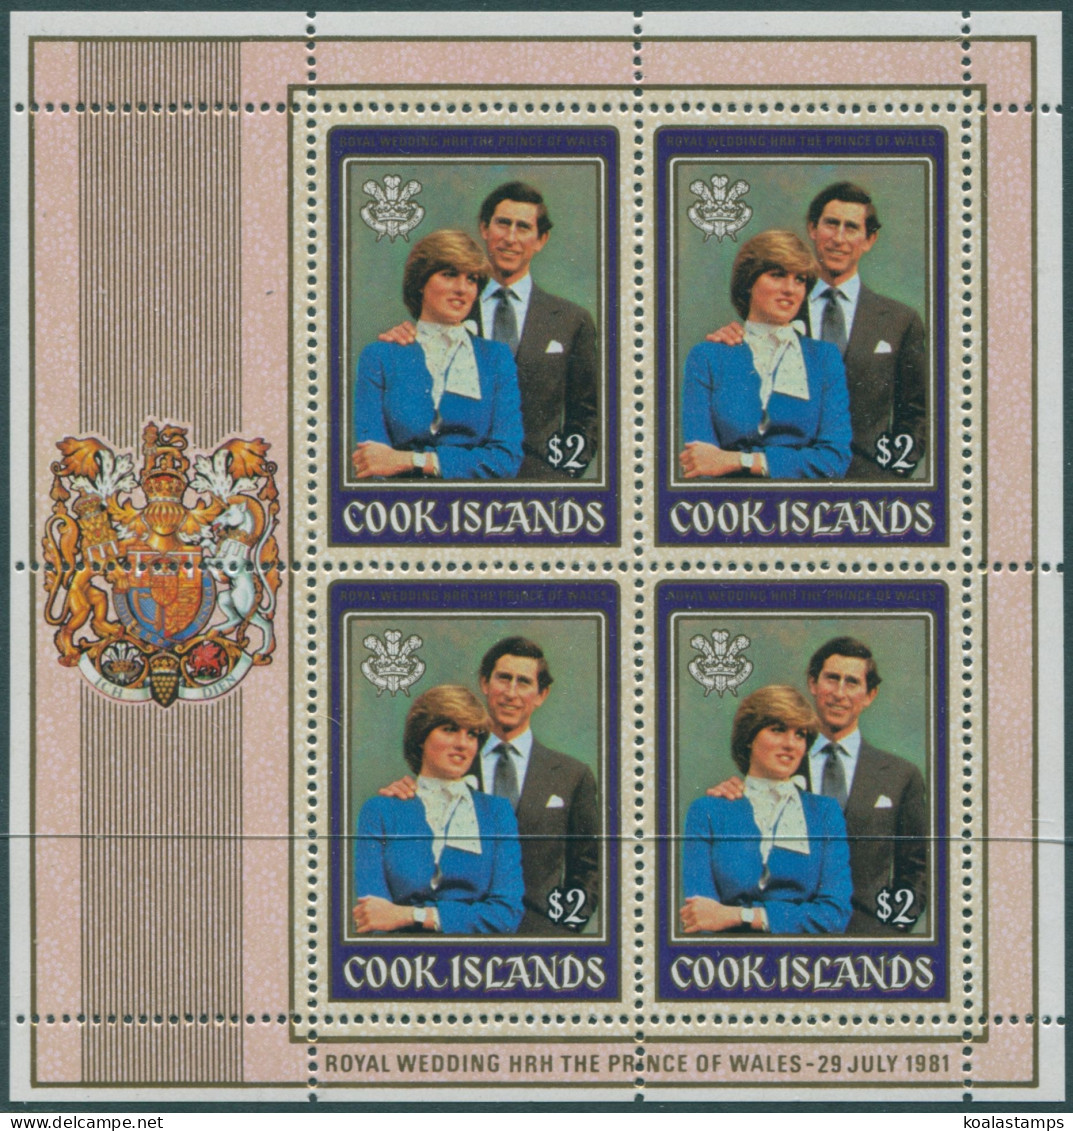 Cook Islands 1981 SG813 $2 Charles And Diana MS MNH - Cook